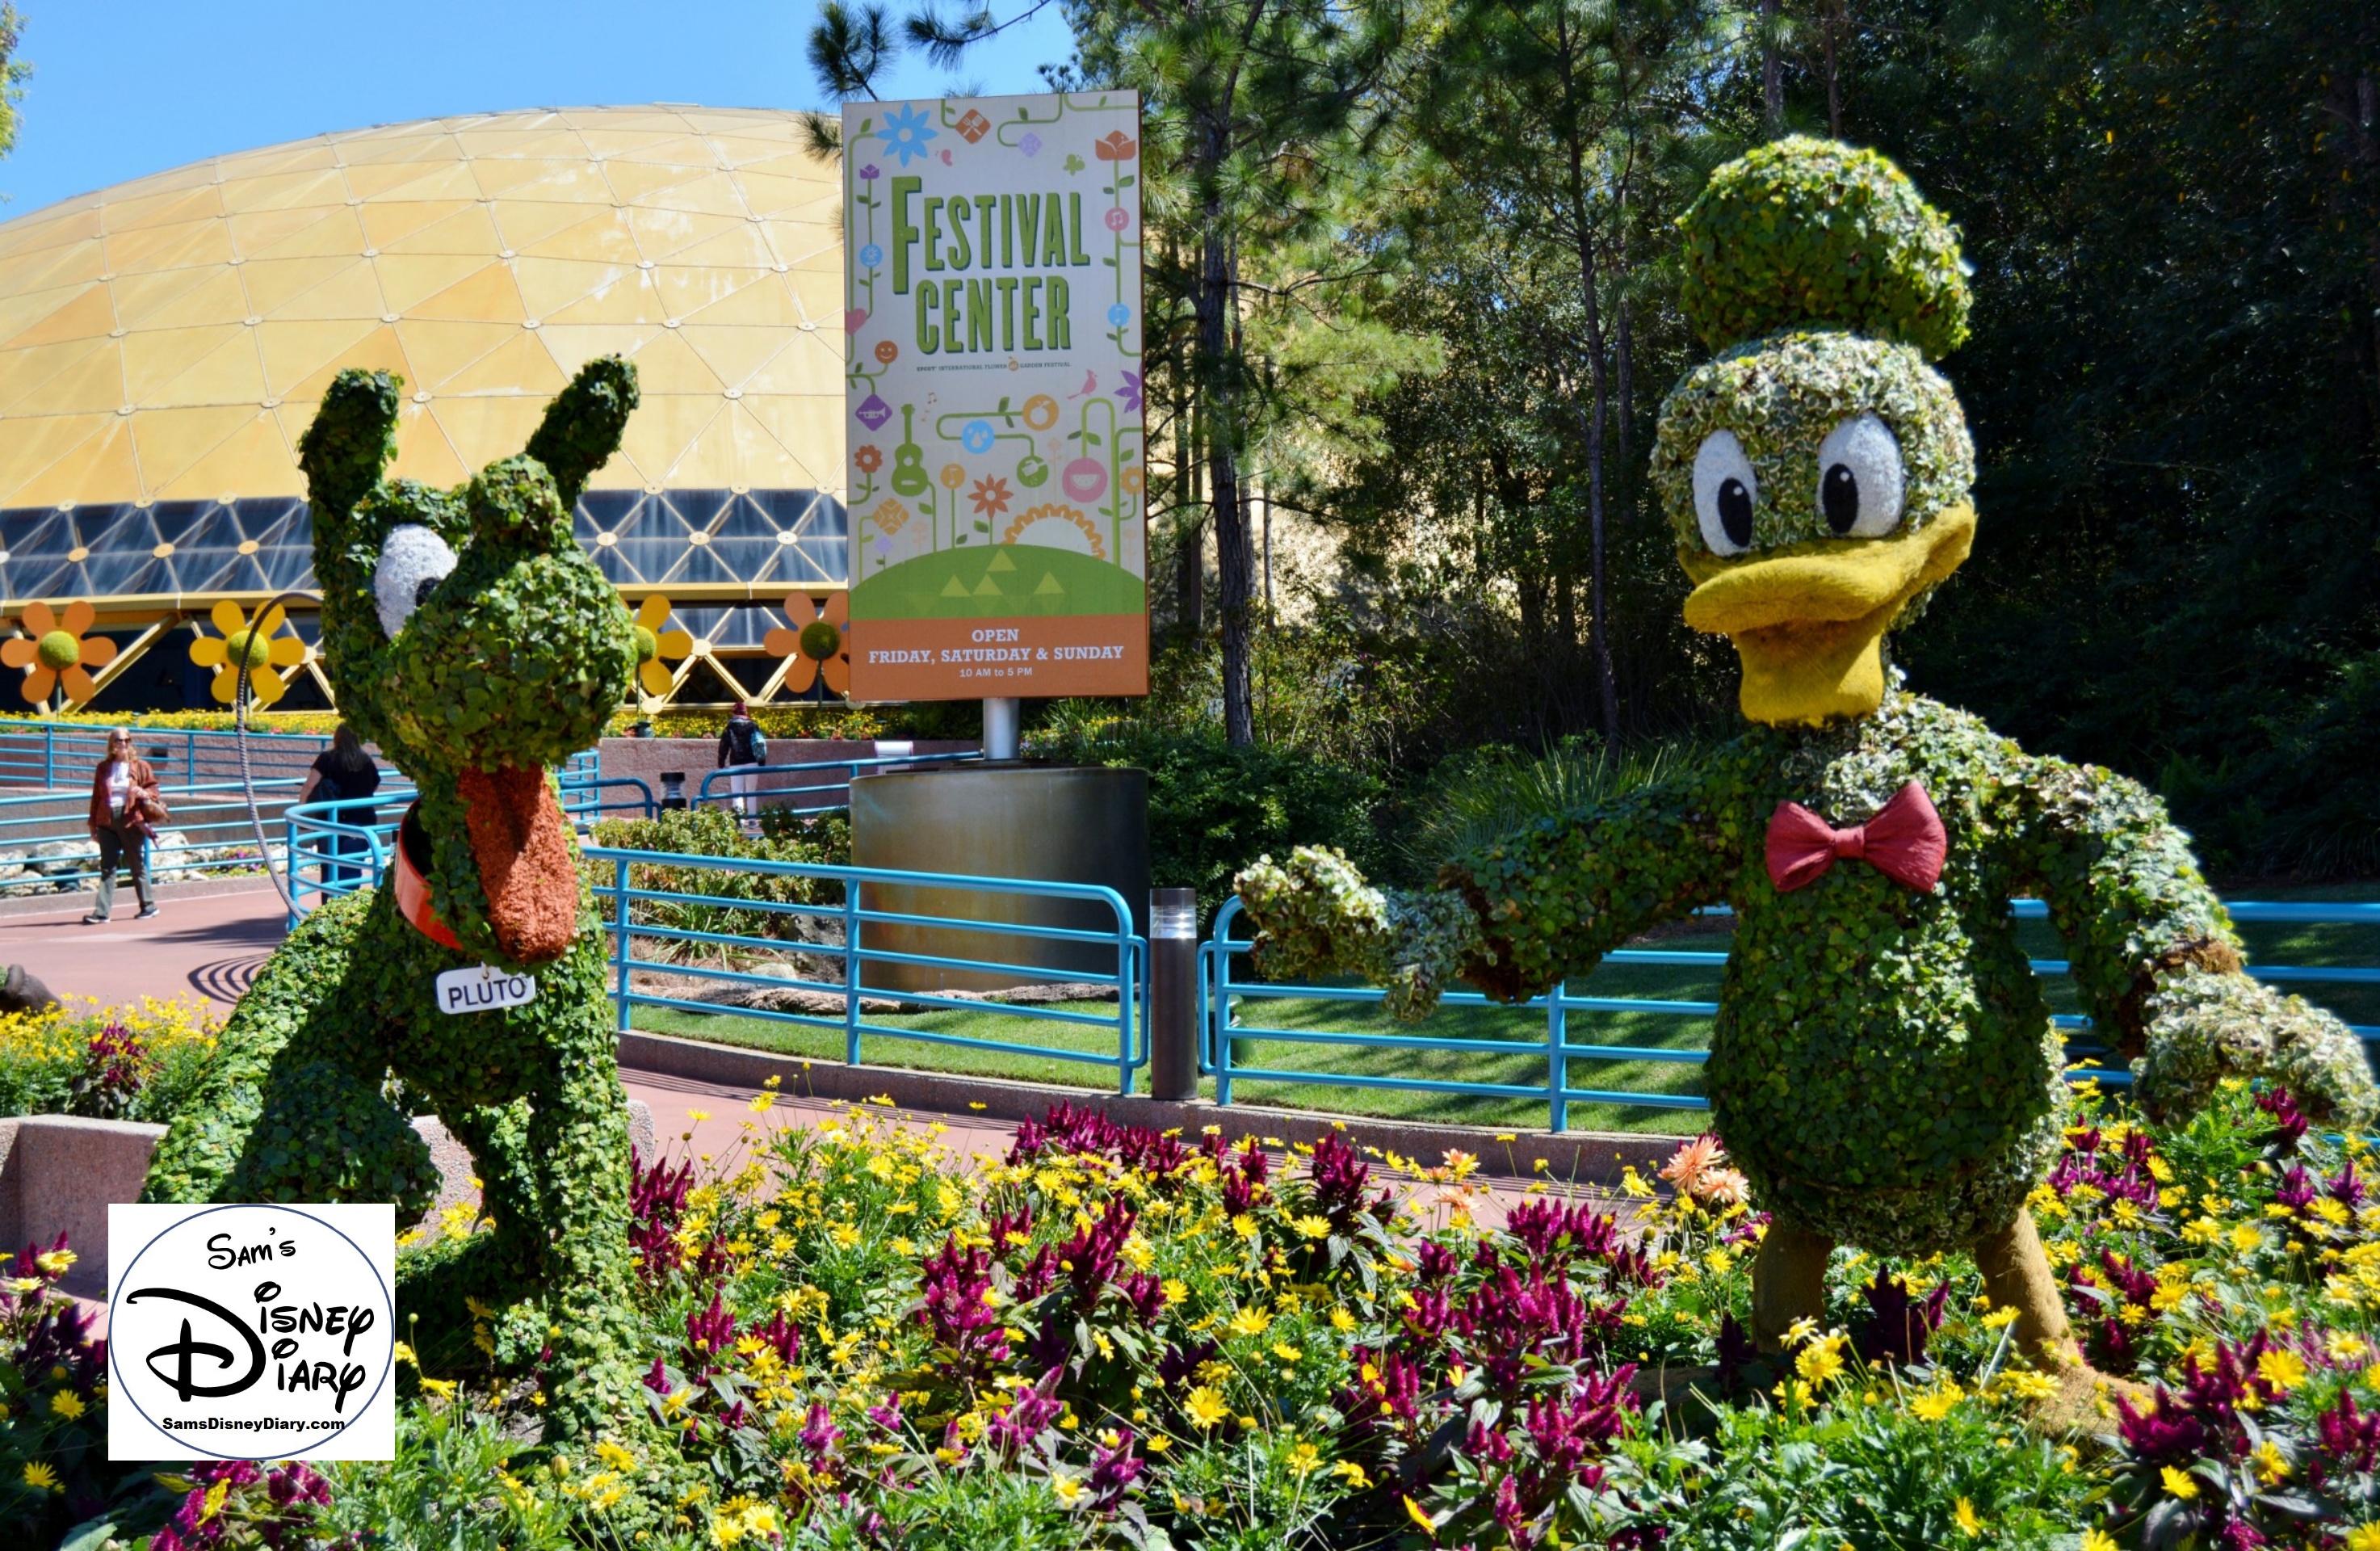 The 2017 Epcot International Flower and Garden Festival - Pluto and Donald outside of the Festival Center